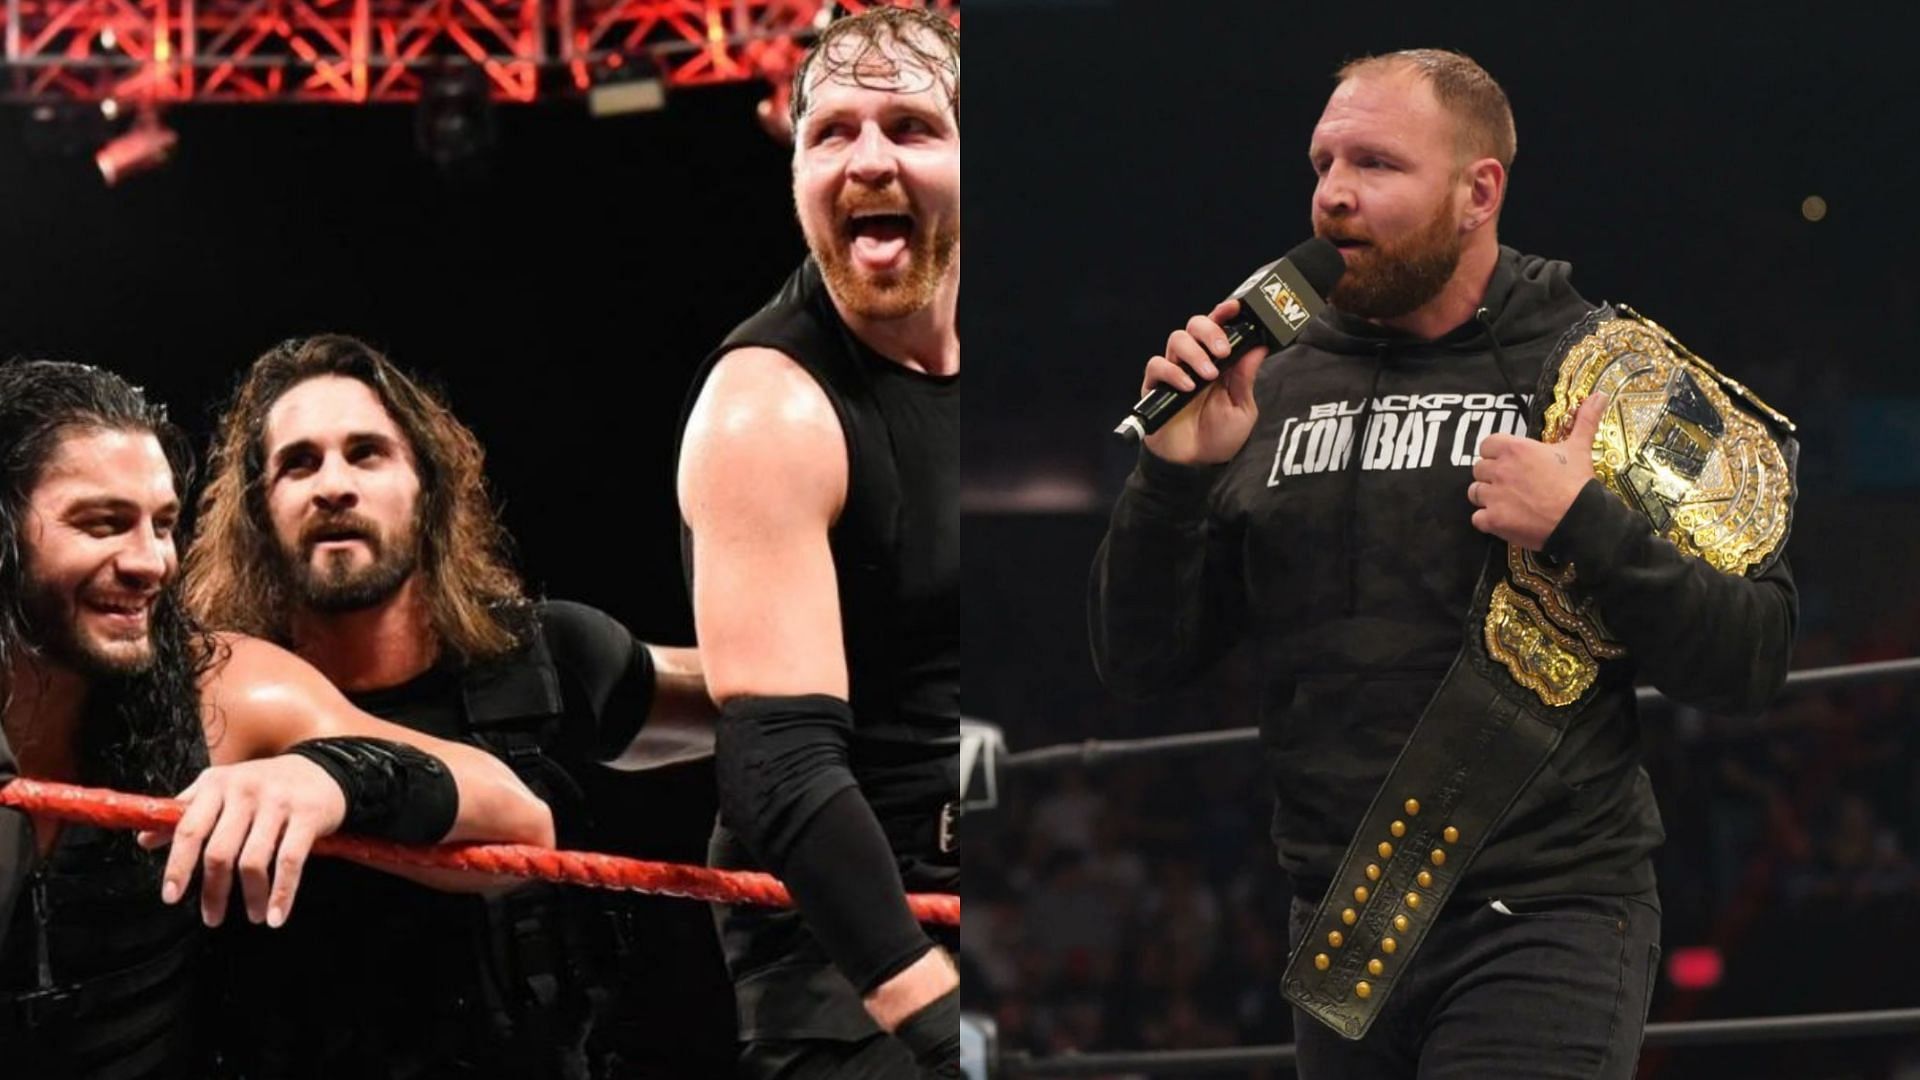 Jon Moxley (fka Dean Ambrose) is a former member of The Shield